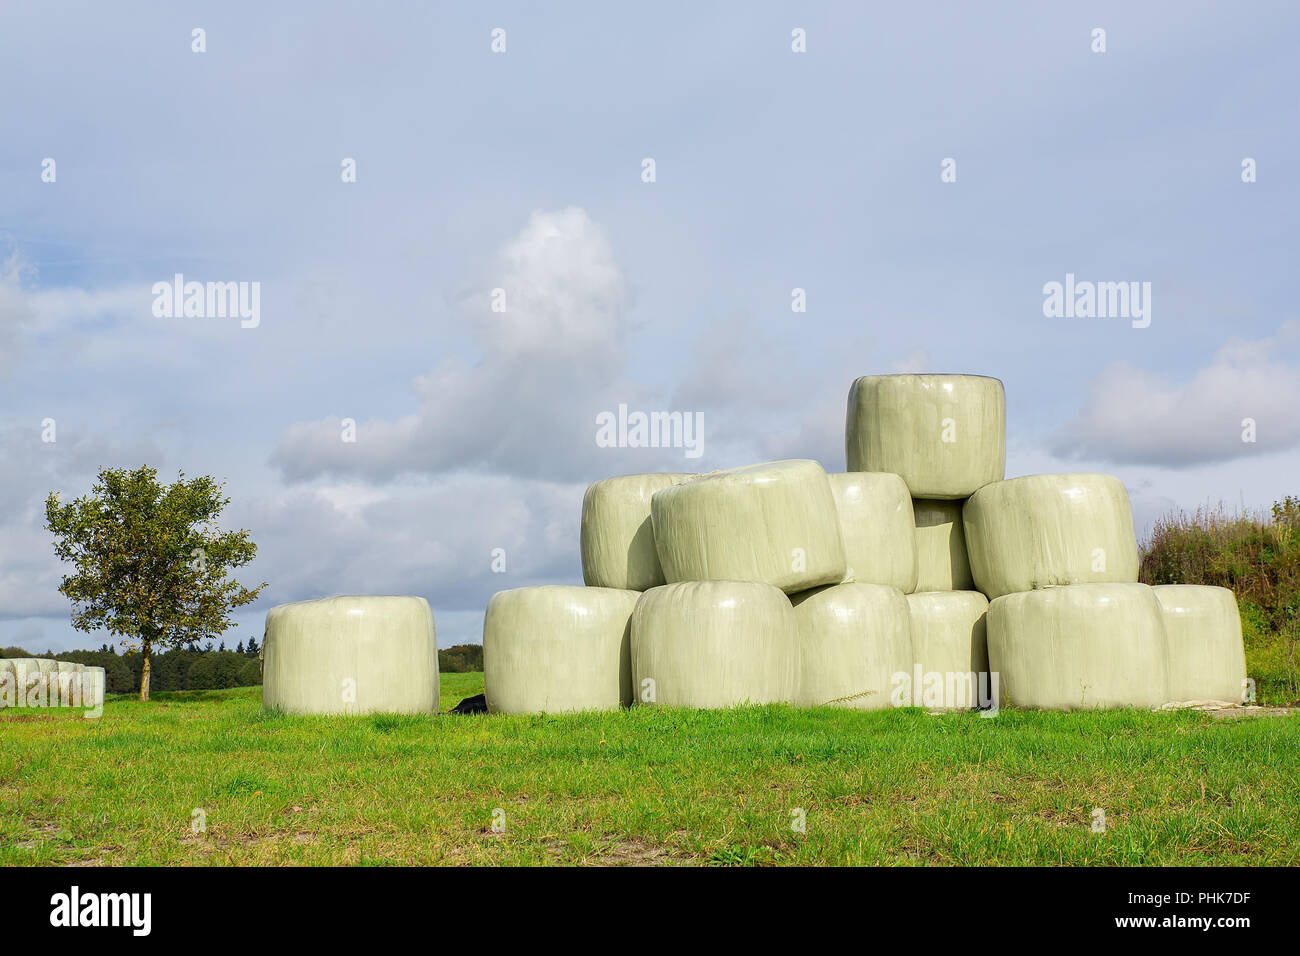 Group of hay bales in meadow Stock Photo